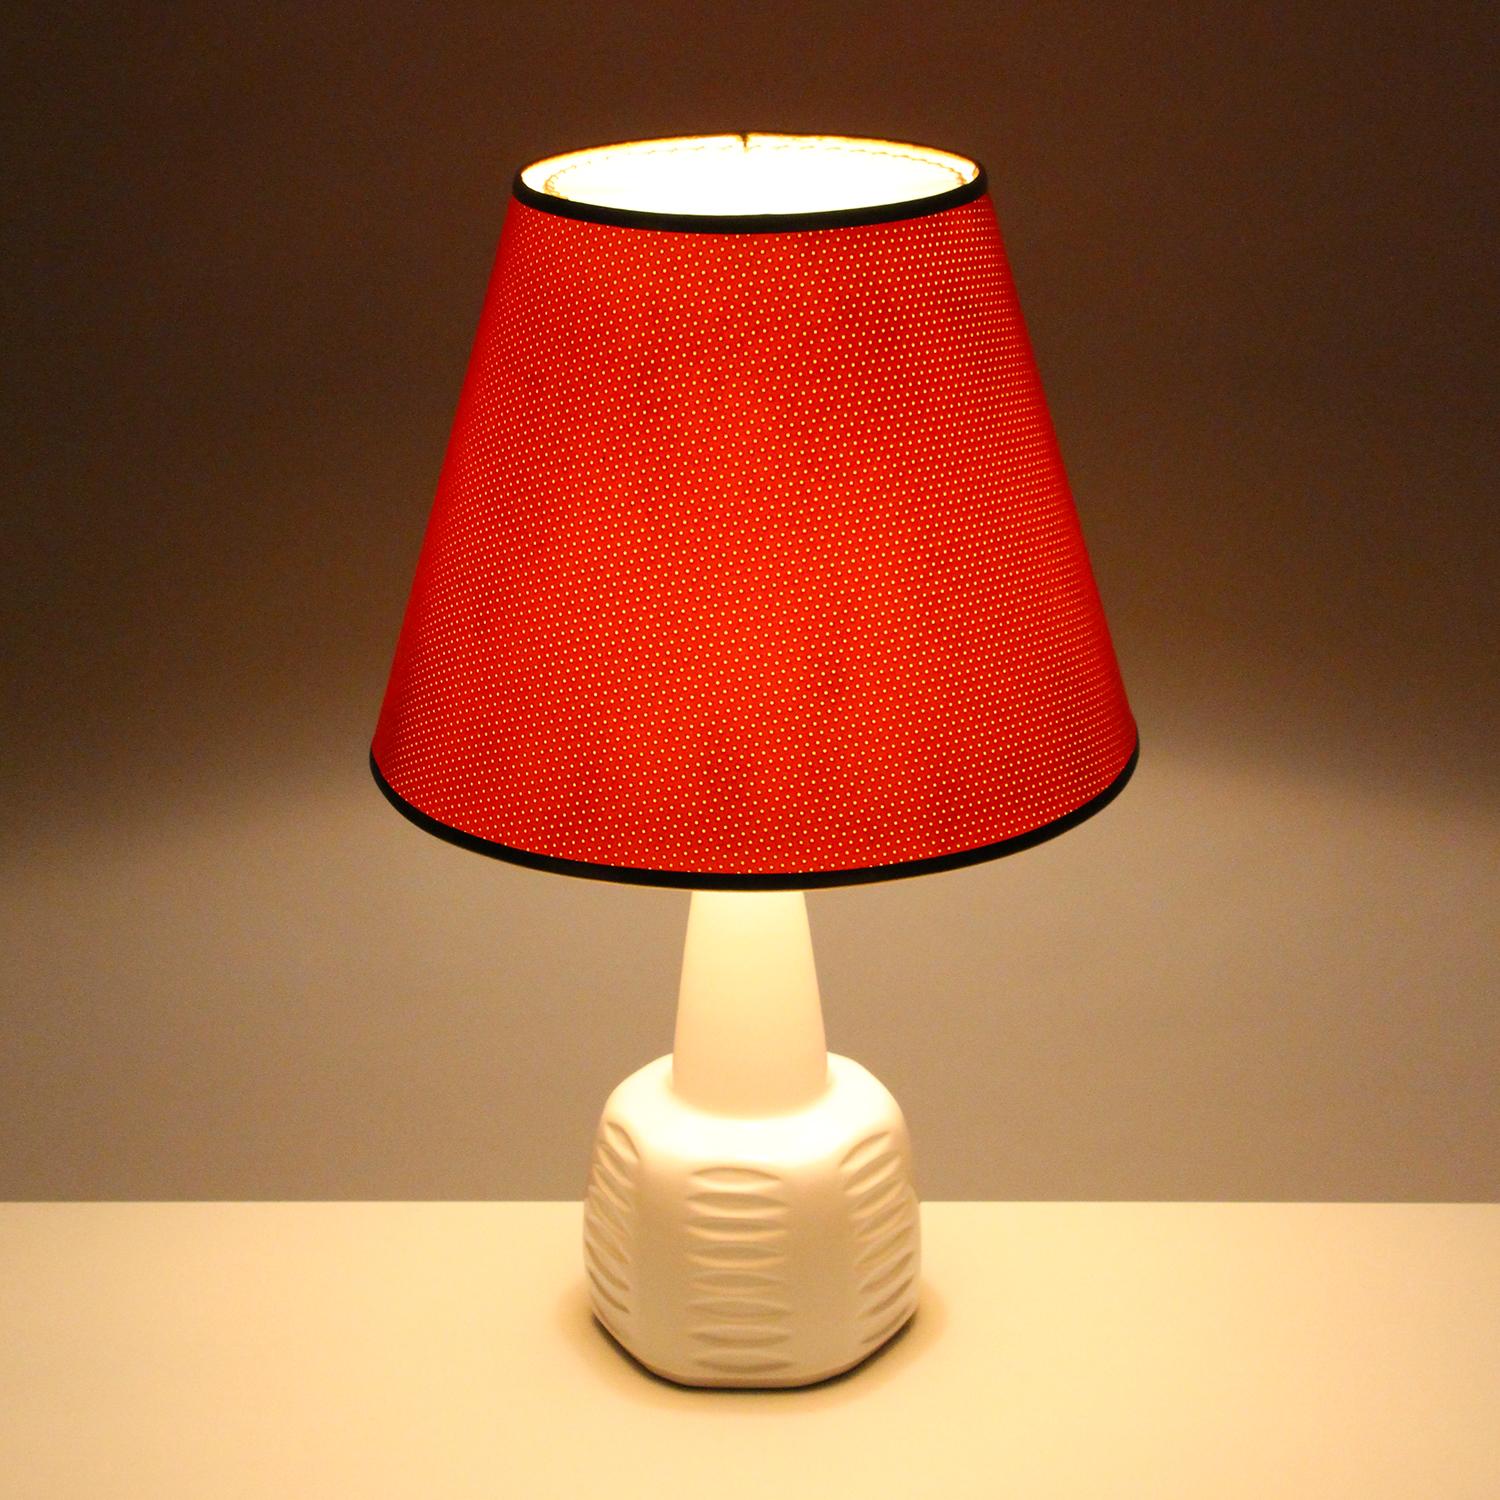 Mid-20th Century White Ceramic Table Lamp by Einar Johansen for Soholm 1960s with Shade Included For Sale